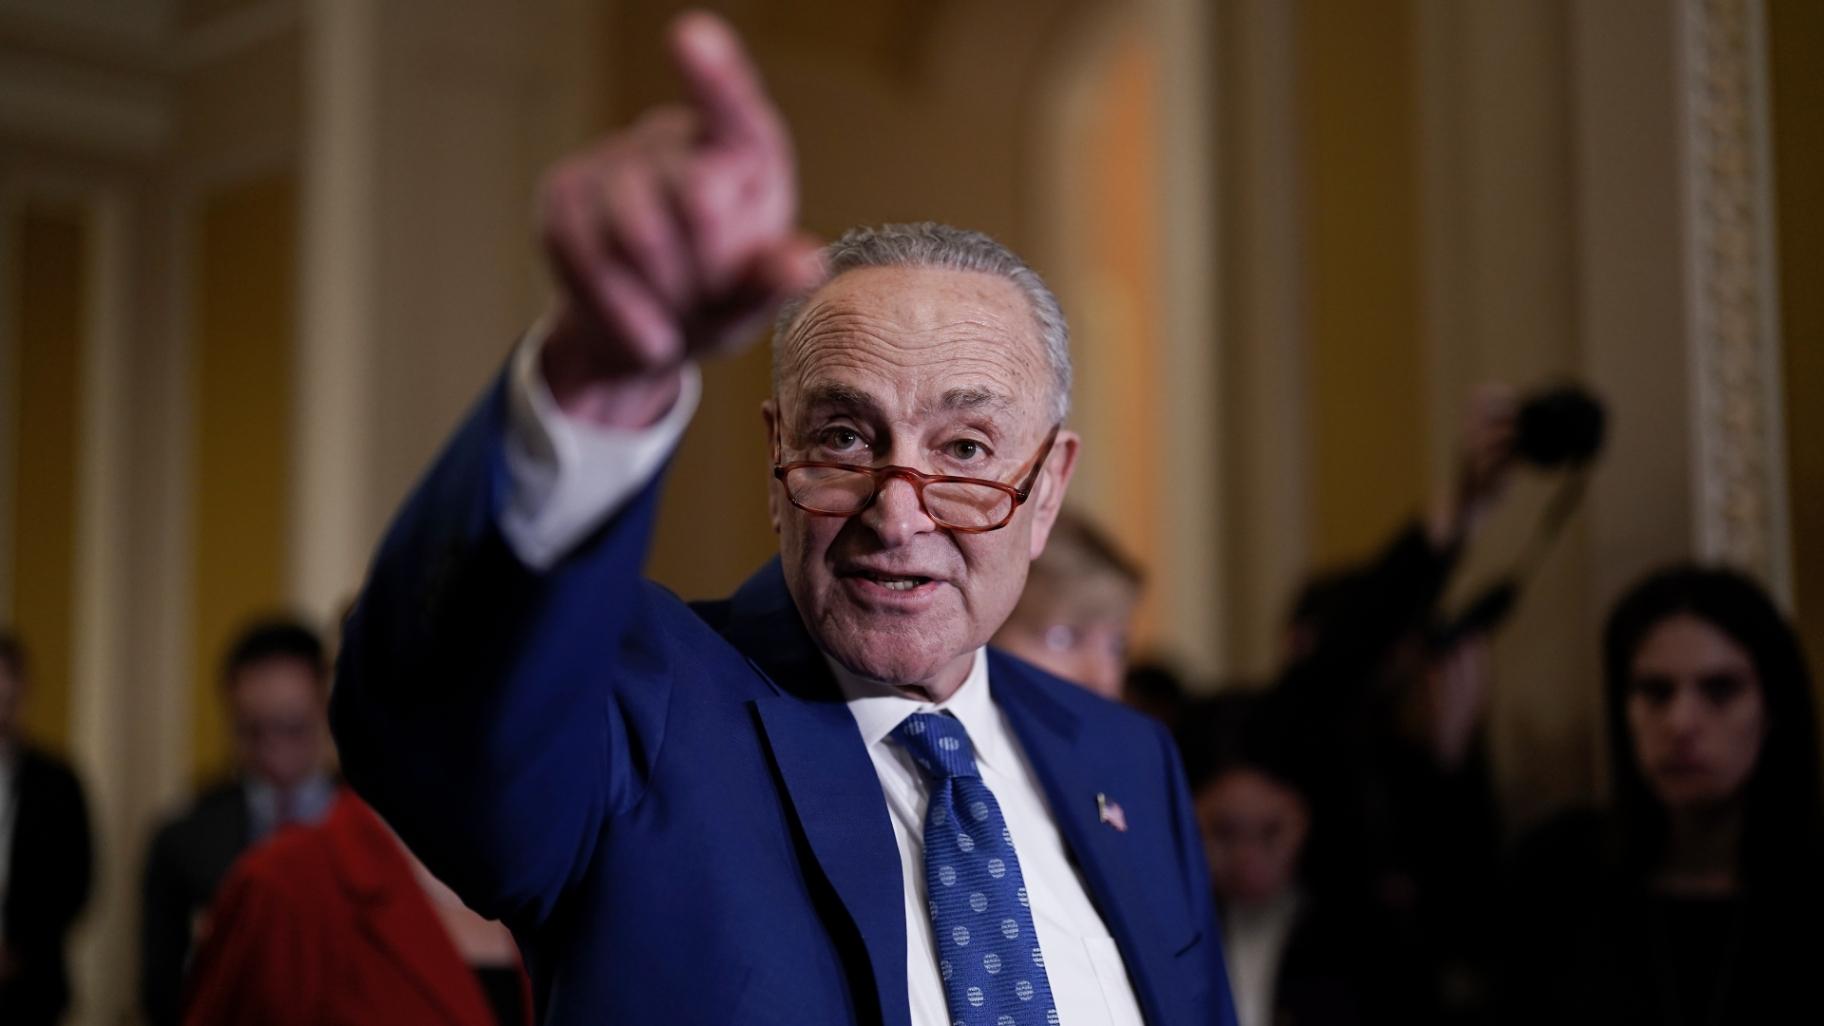 Senate Majority Leader Chuck Schumer, D-N.Y., speaks to reporters following a closed-door policy meeting on the Democrats' lame duck agenda, at the Capitol in Washington, Tuesday, Nov. 15, 2022. (AP Photo / J. Scott Applewhite)